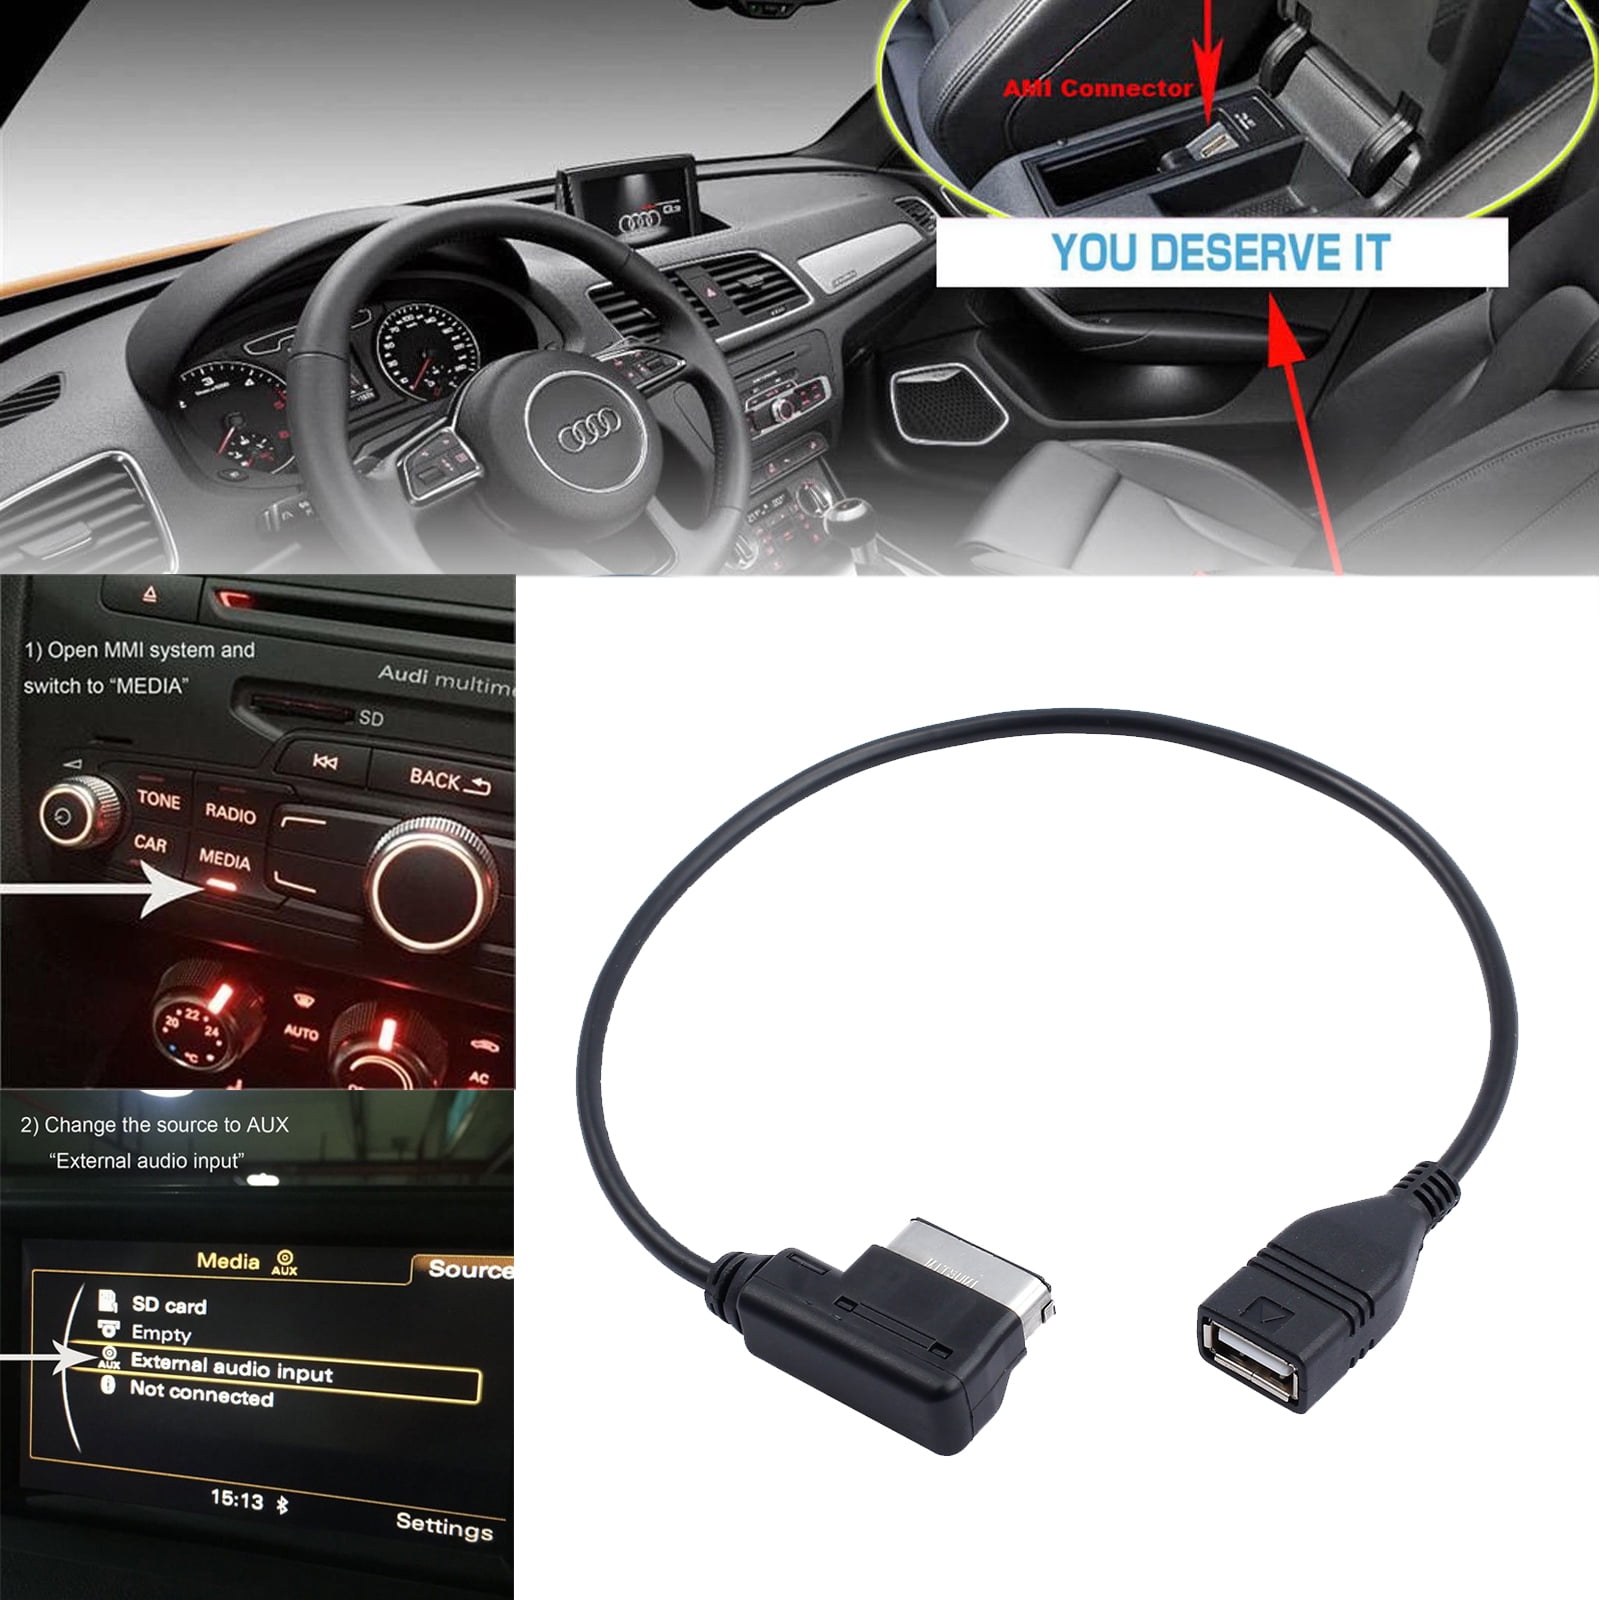 AMI MMI 3G INTERFACE SWITCH WIRING CABLE FOR AUDI A4 A5 A6 A8 Q5 Q7 VW TOUAREG k